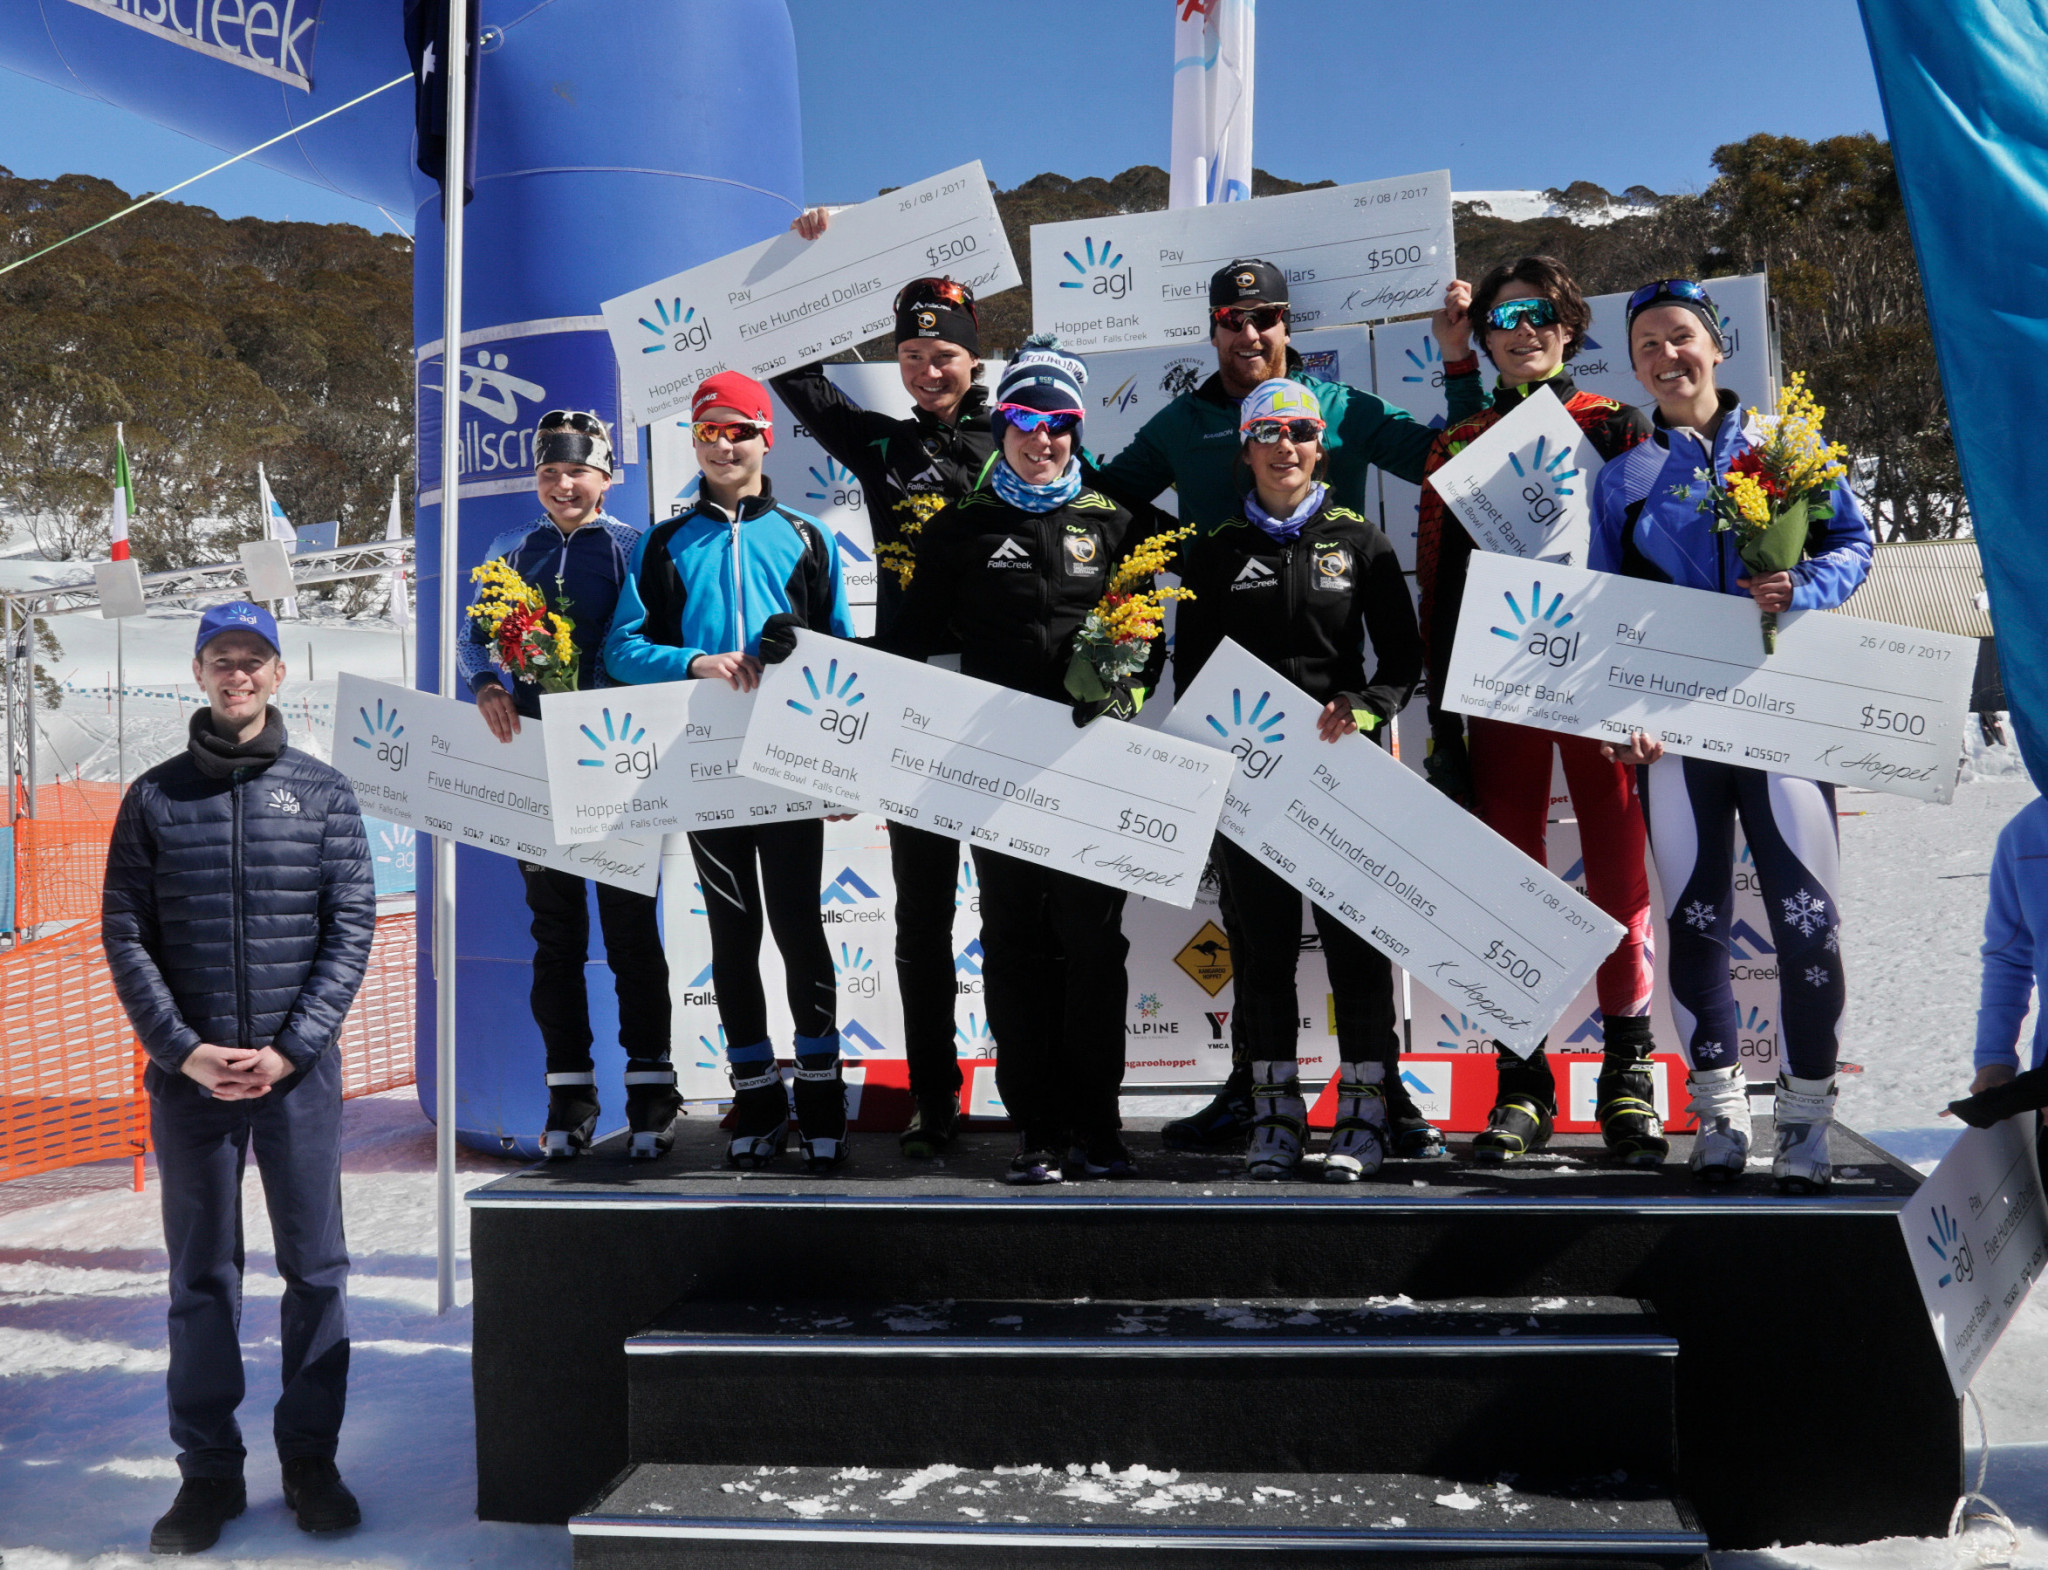 A number of skiing scholarships were awarded as part of the event ©Ski & Snowboard Australia 